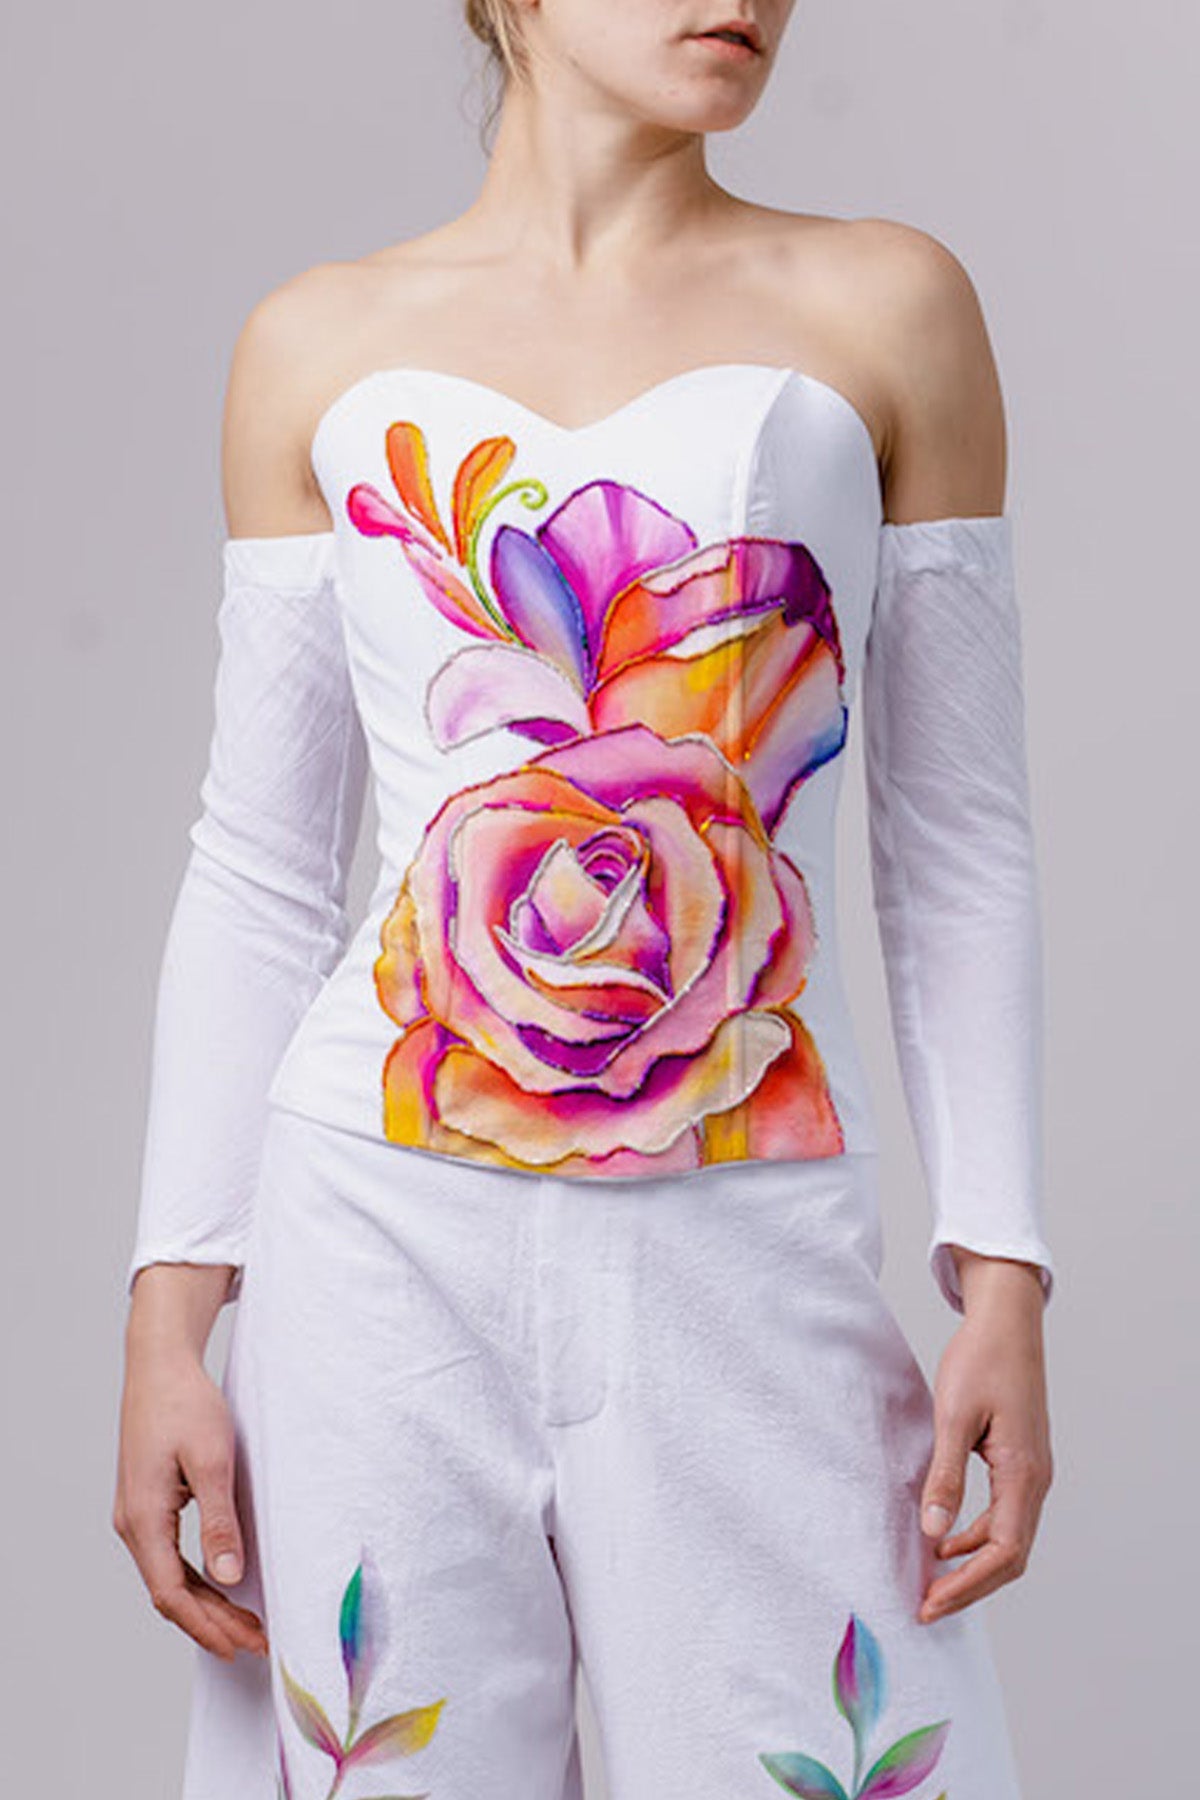 PAINTED AND HAND EMBROIDERED CORSET TOP - ROSAS